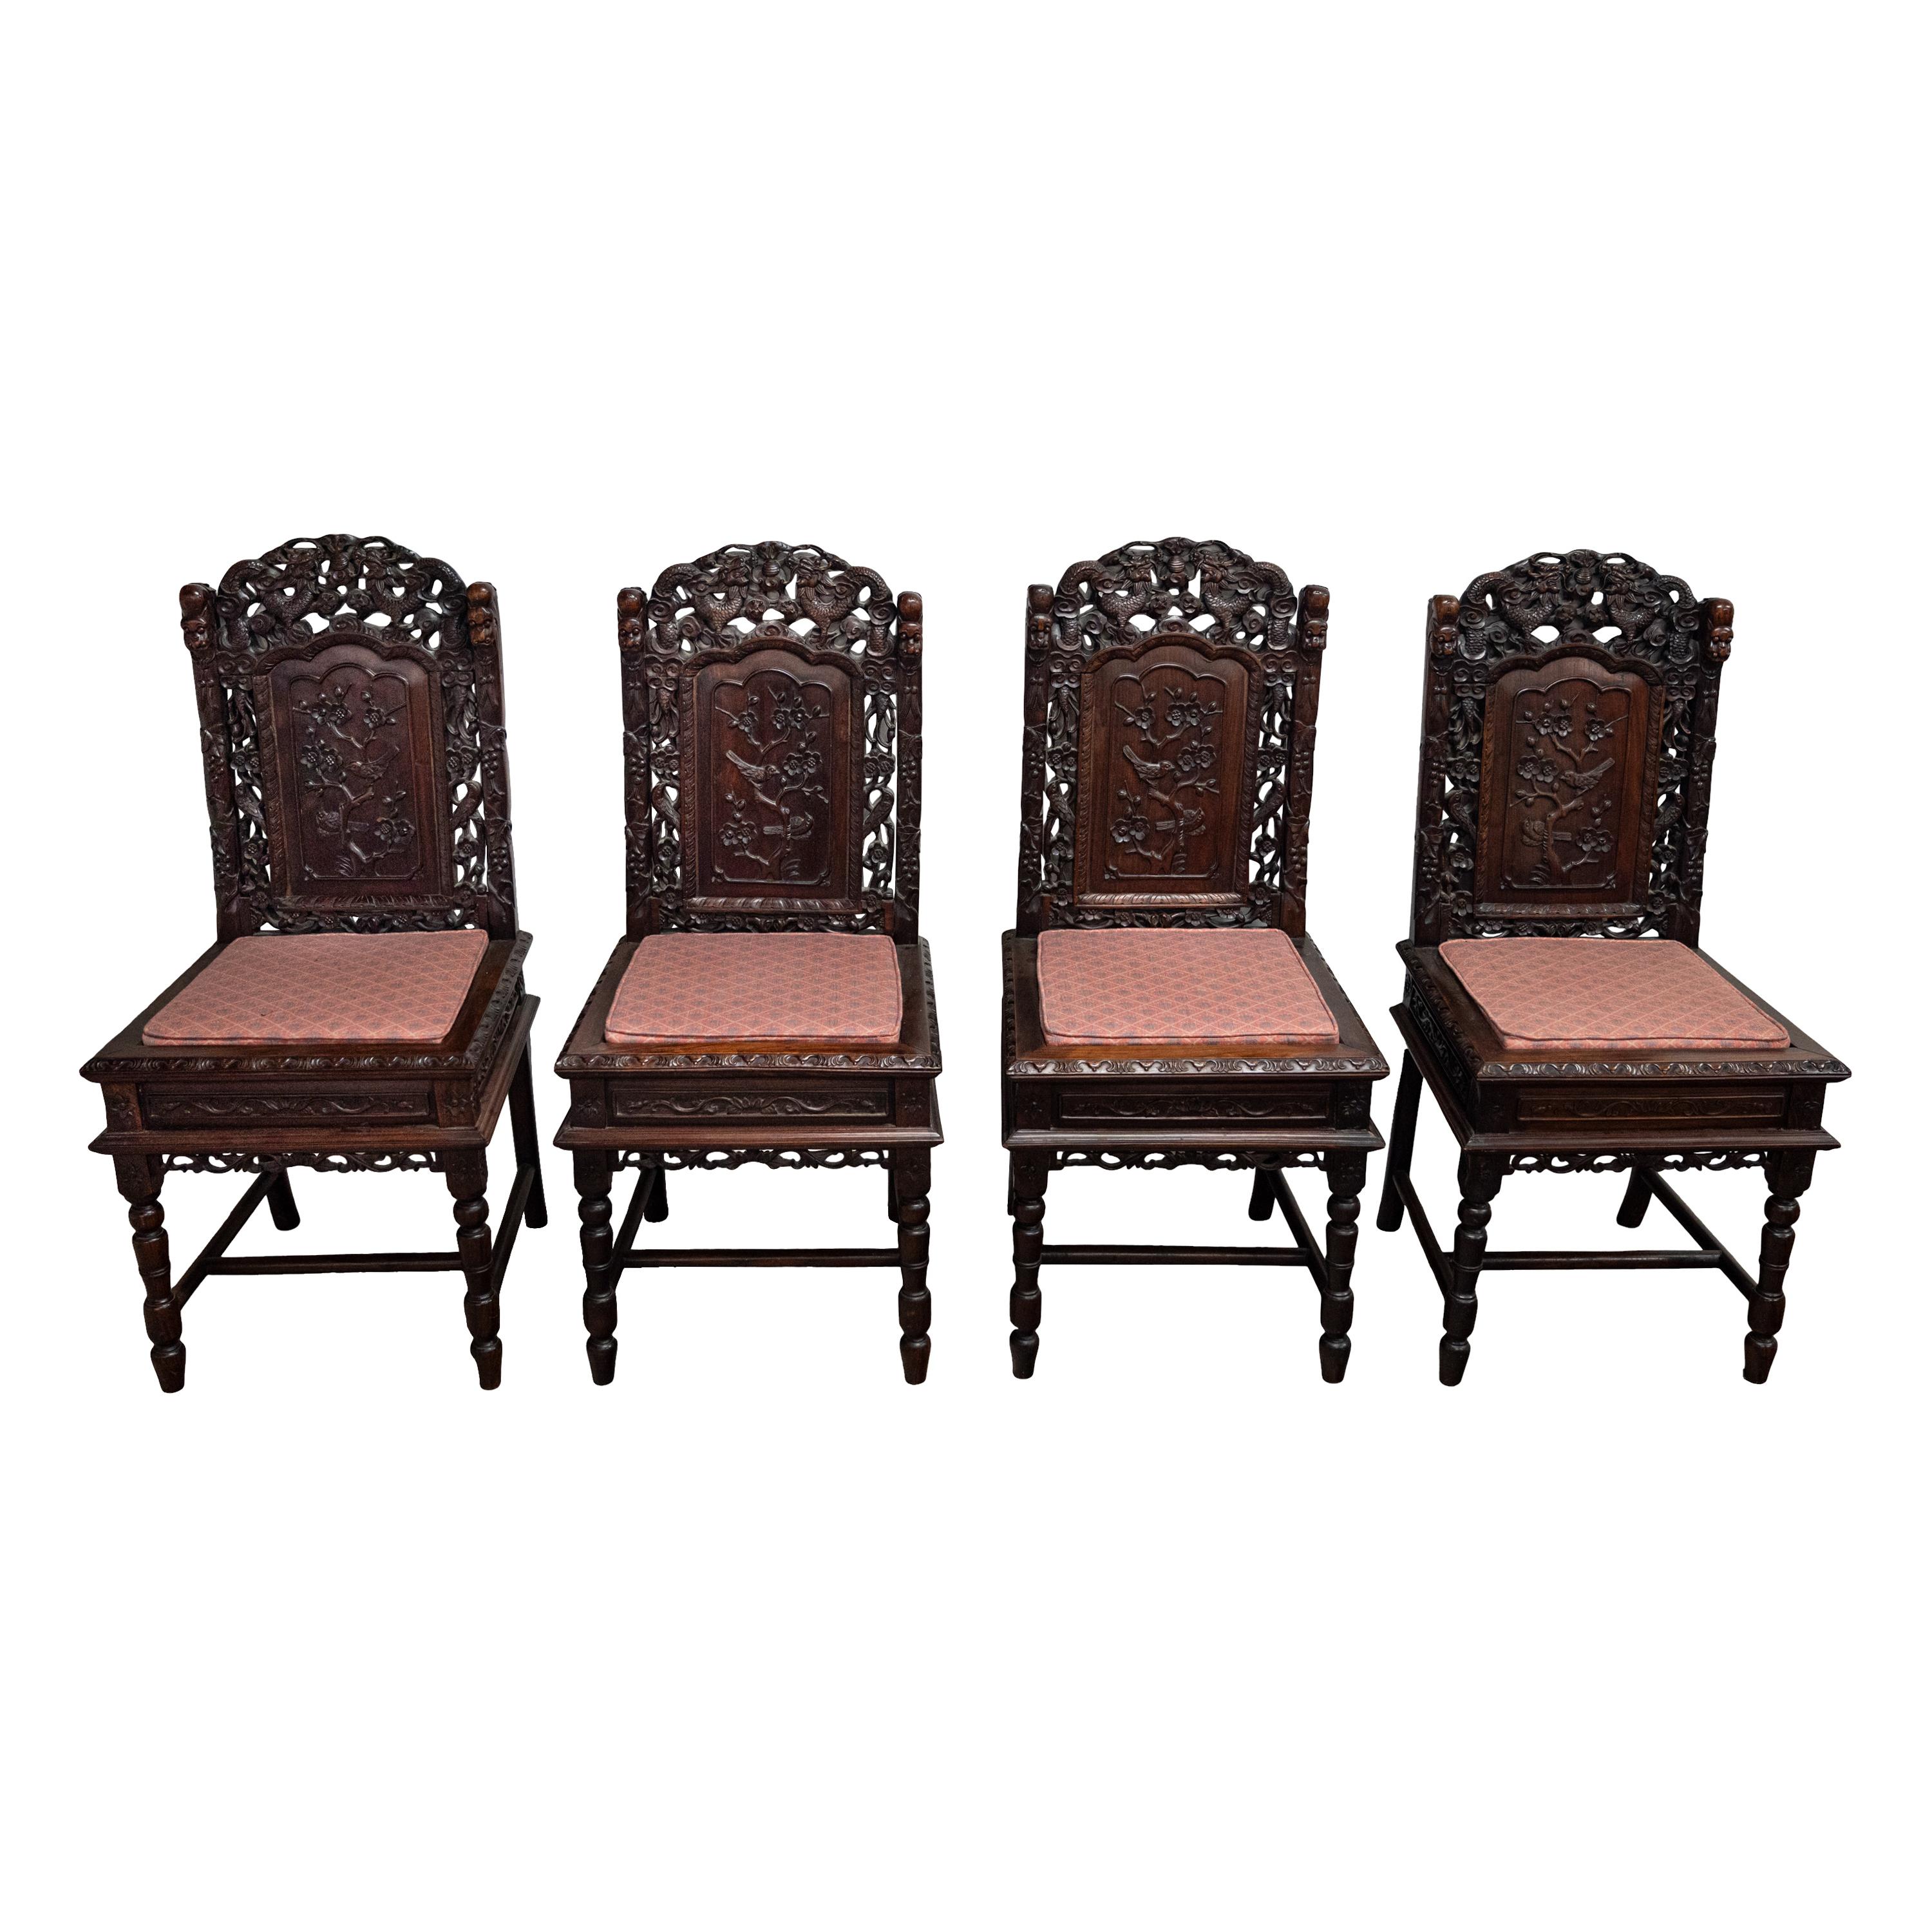 A fine set of four antique Chinese Qing dynasty carved rosewood dragon chairs, circa 1880.
Each chair is finely carved crest with two facing dragons and a flaming pearl, signifying prosperity and wisdom, to each side of the crest is a carved foo dog